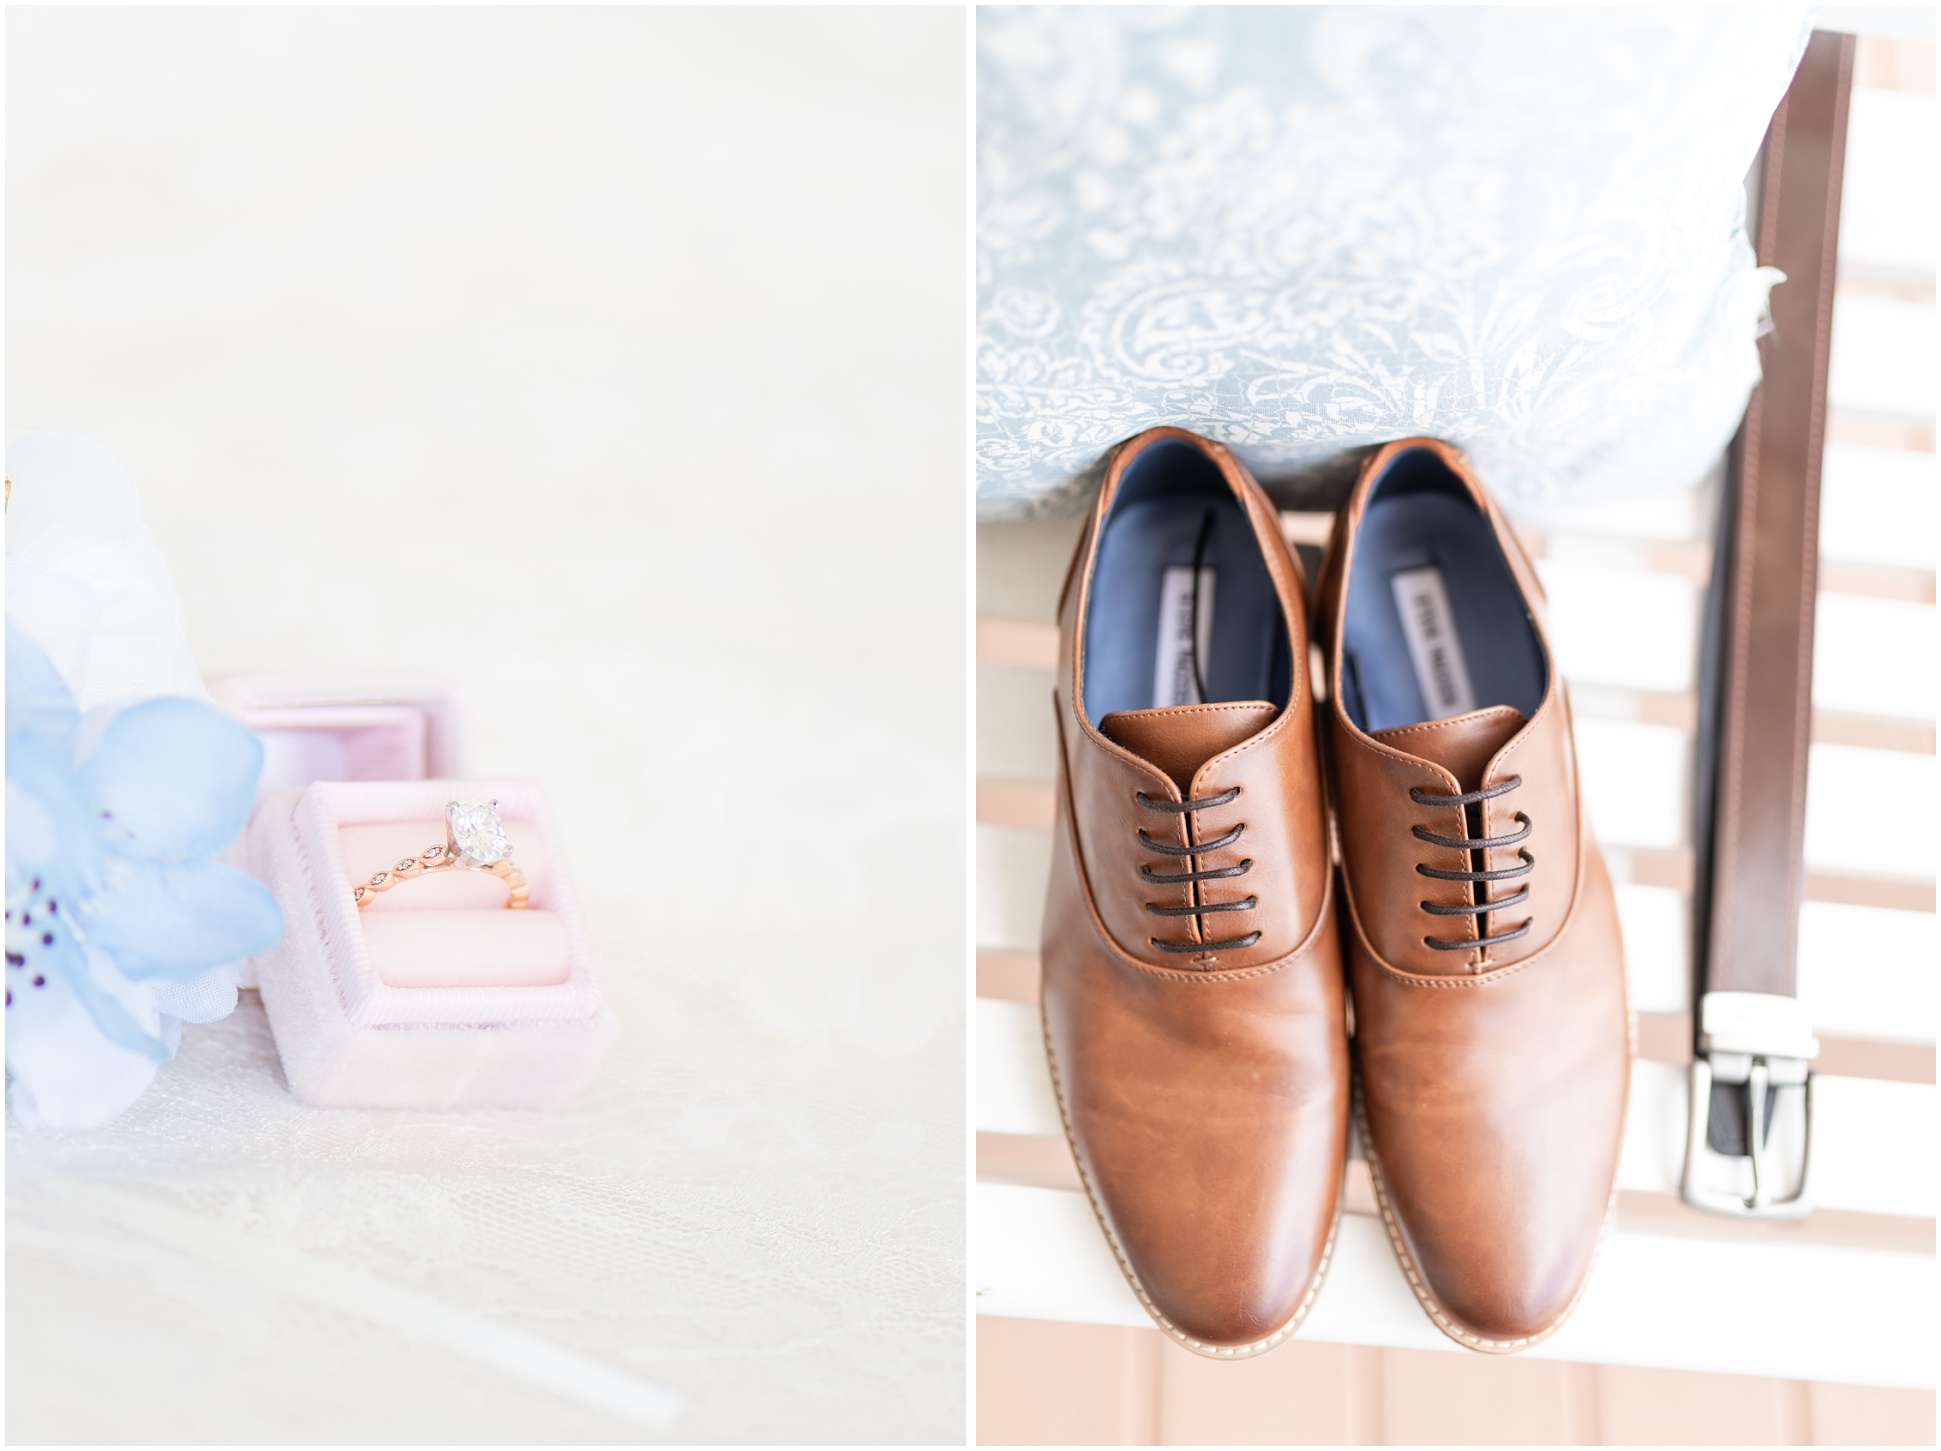 Two Images; On the left is a detail shot of the engagement ring, and the right image is of the groom's shoes and belt